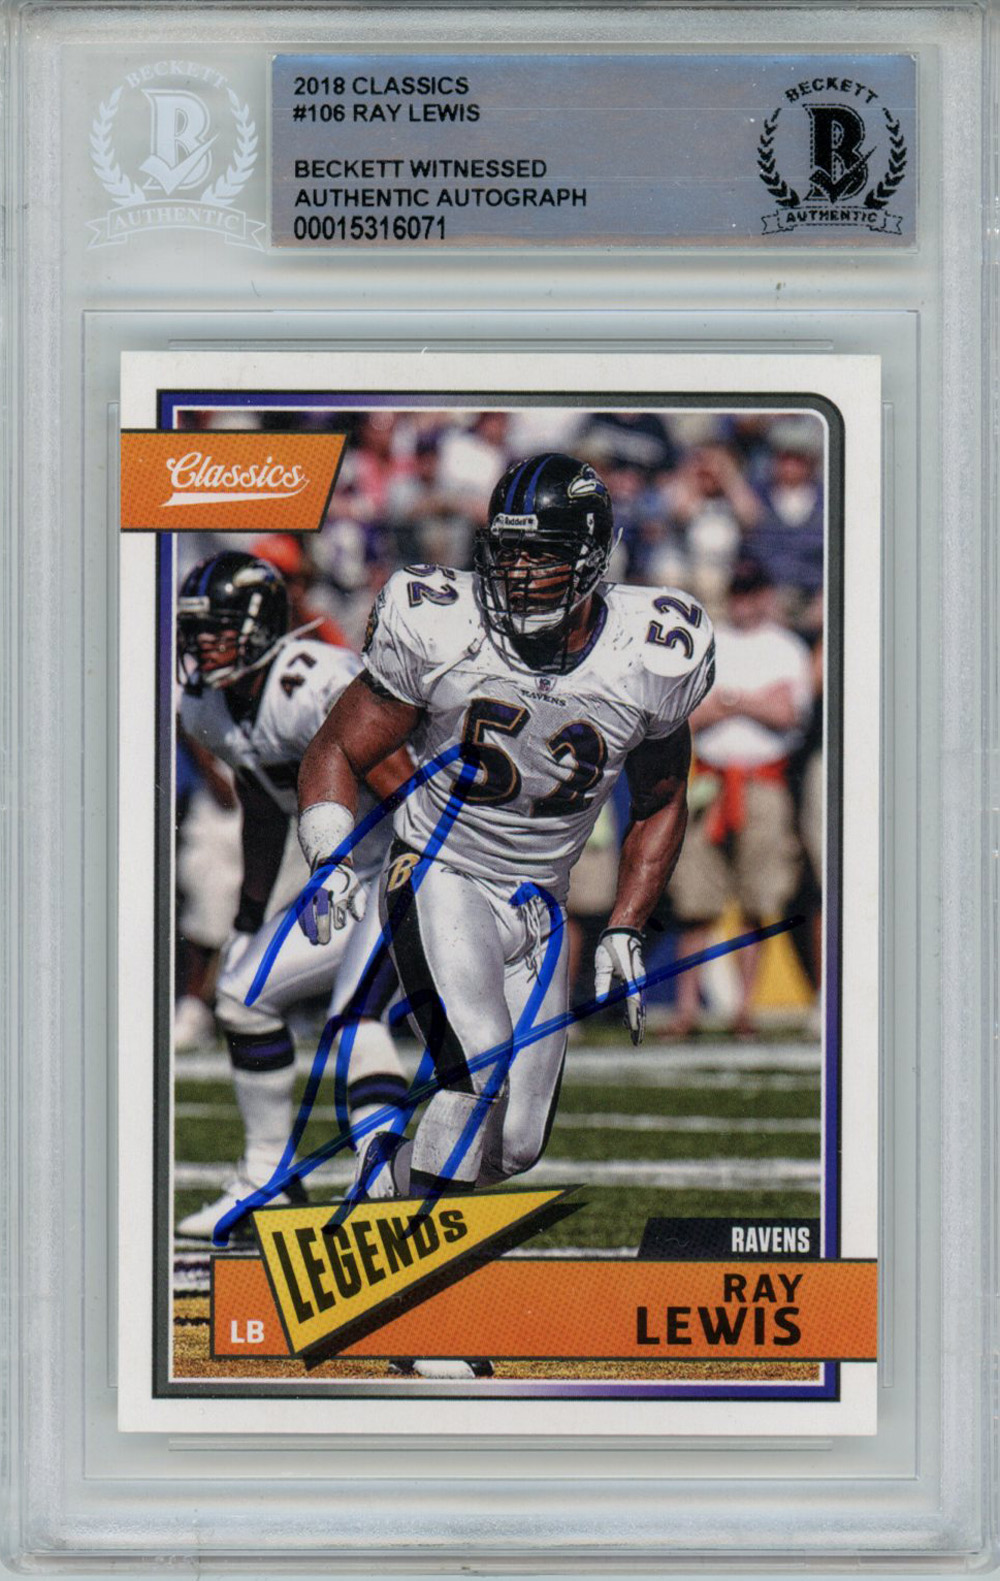 Ray Lewis Autographed 2018 Panini Classics #106 Trading Card Beckett Slab